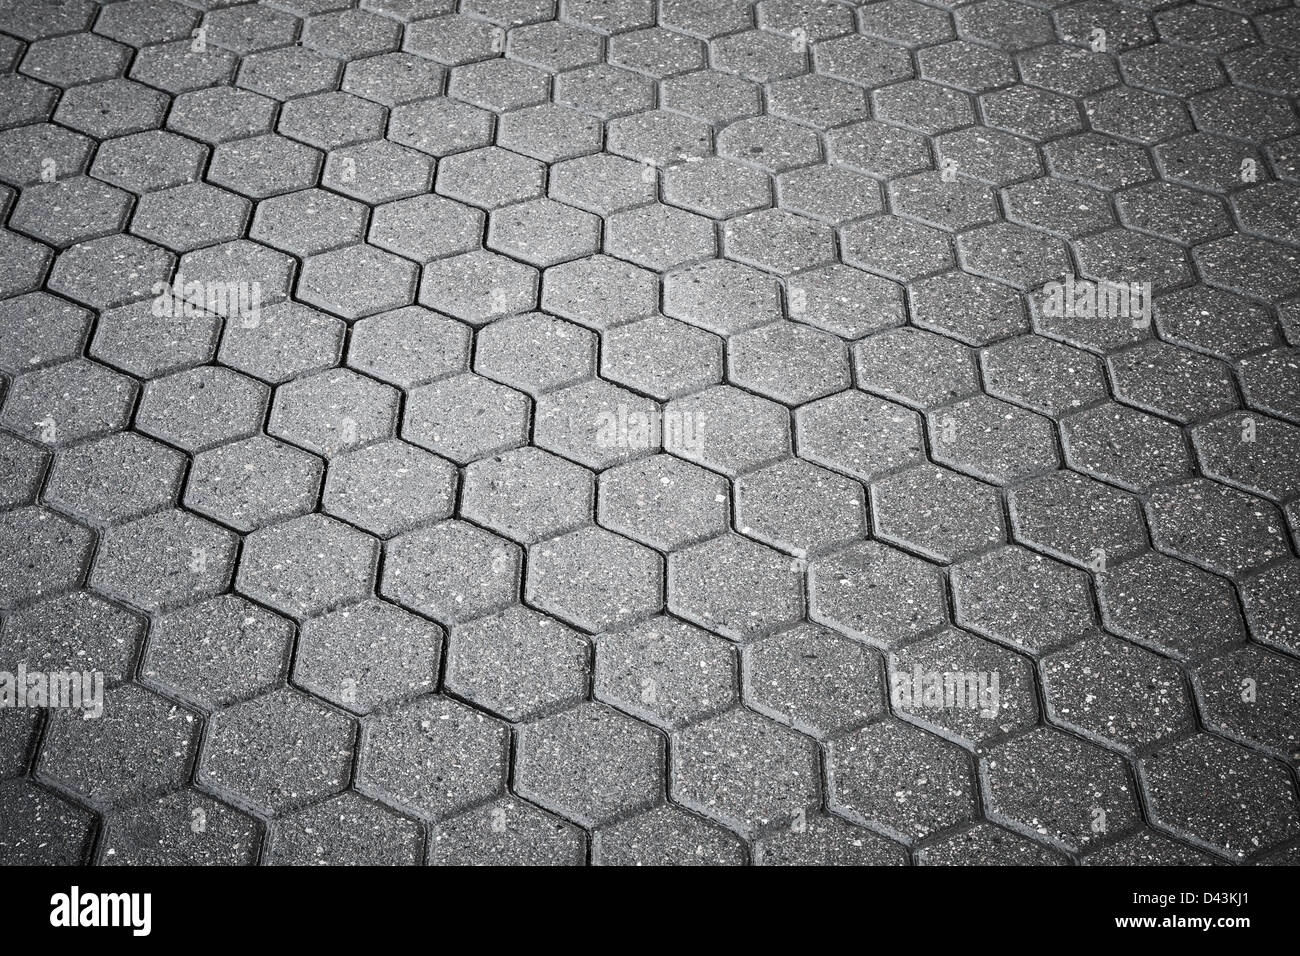 Background texture of gray cellular cobblestone road Stock Photo